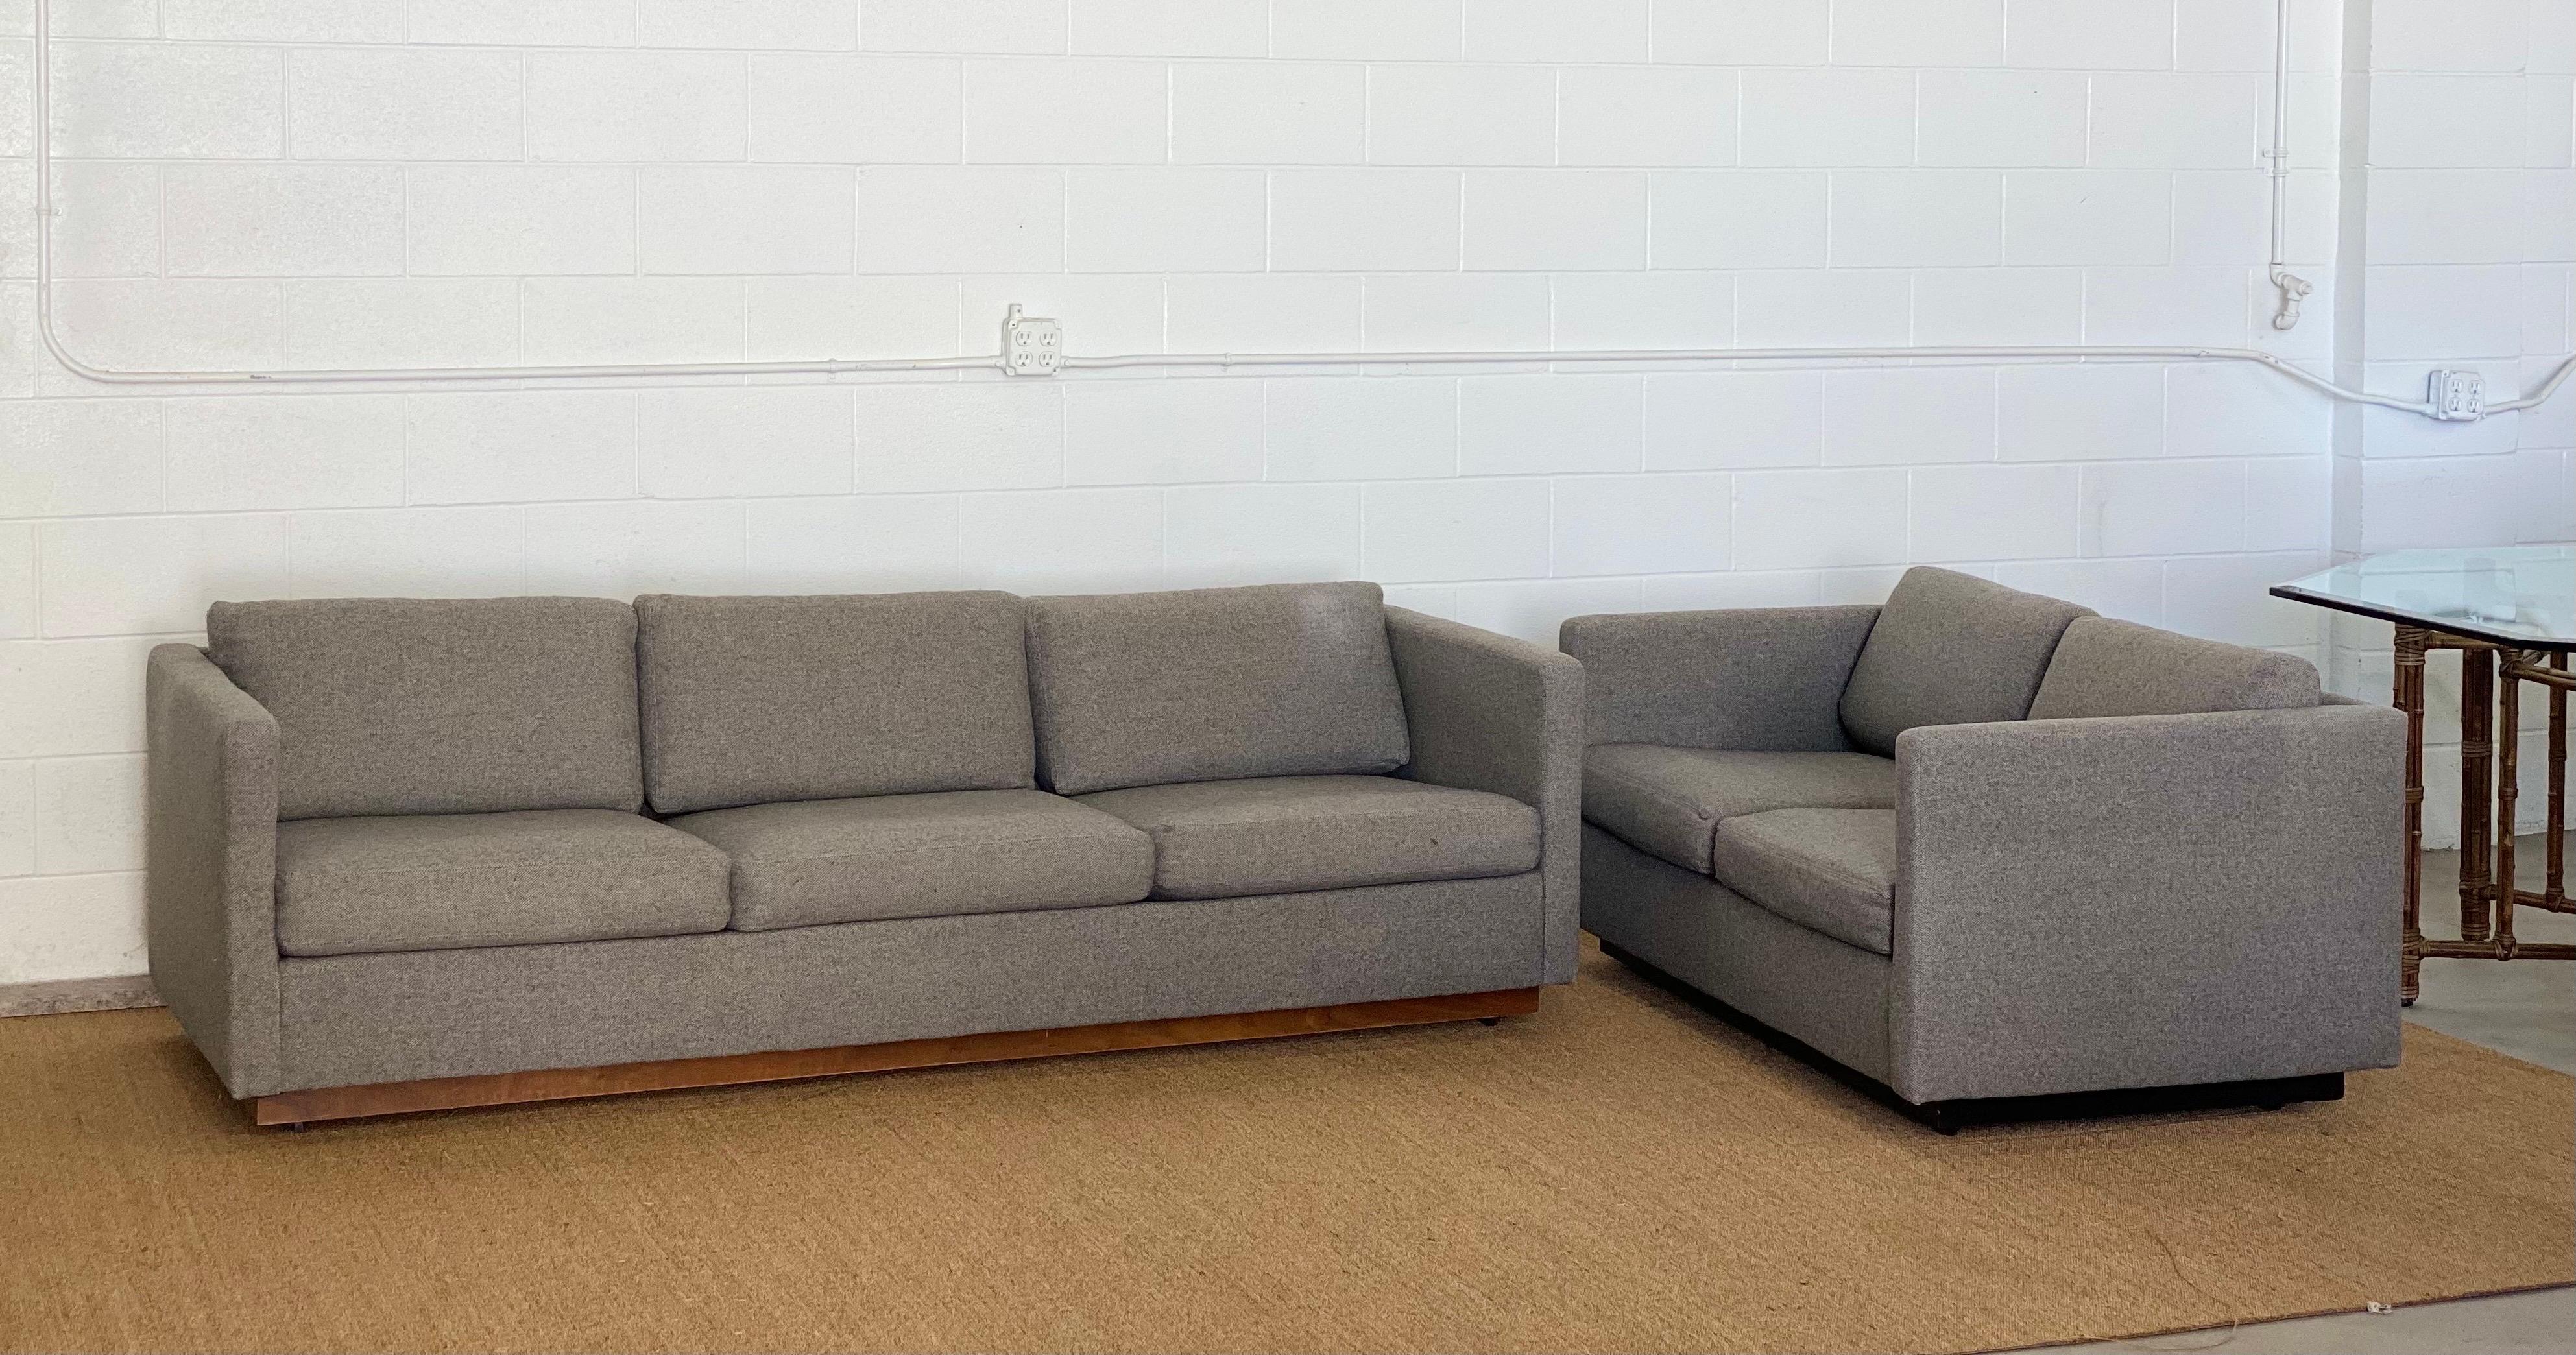 We are very pleased to offer a chic tuxedo sofa by American designer Milo Baughman for Thayer Coggin, circa the 1980s. This sofa showcases a wraparound frame and loose cushions upholstered in a grey fabric supported by a brown hardwood plinth base.